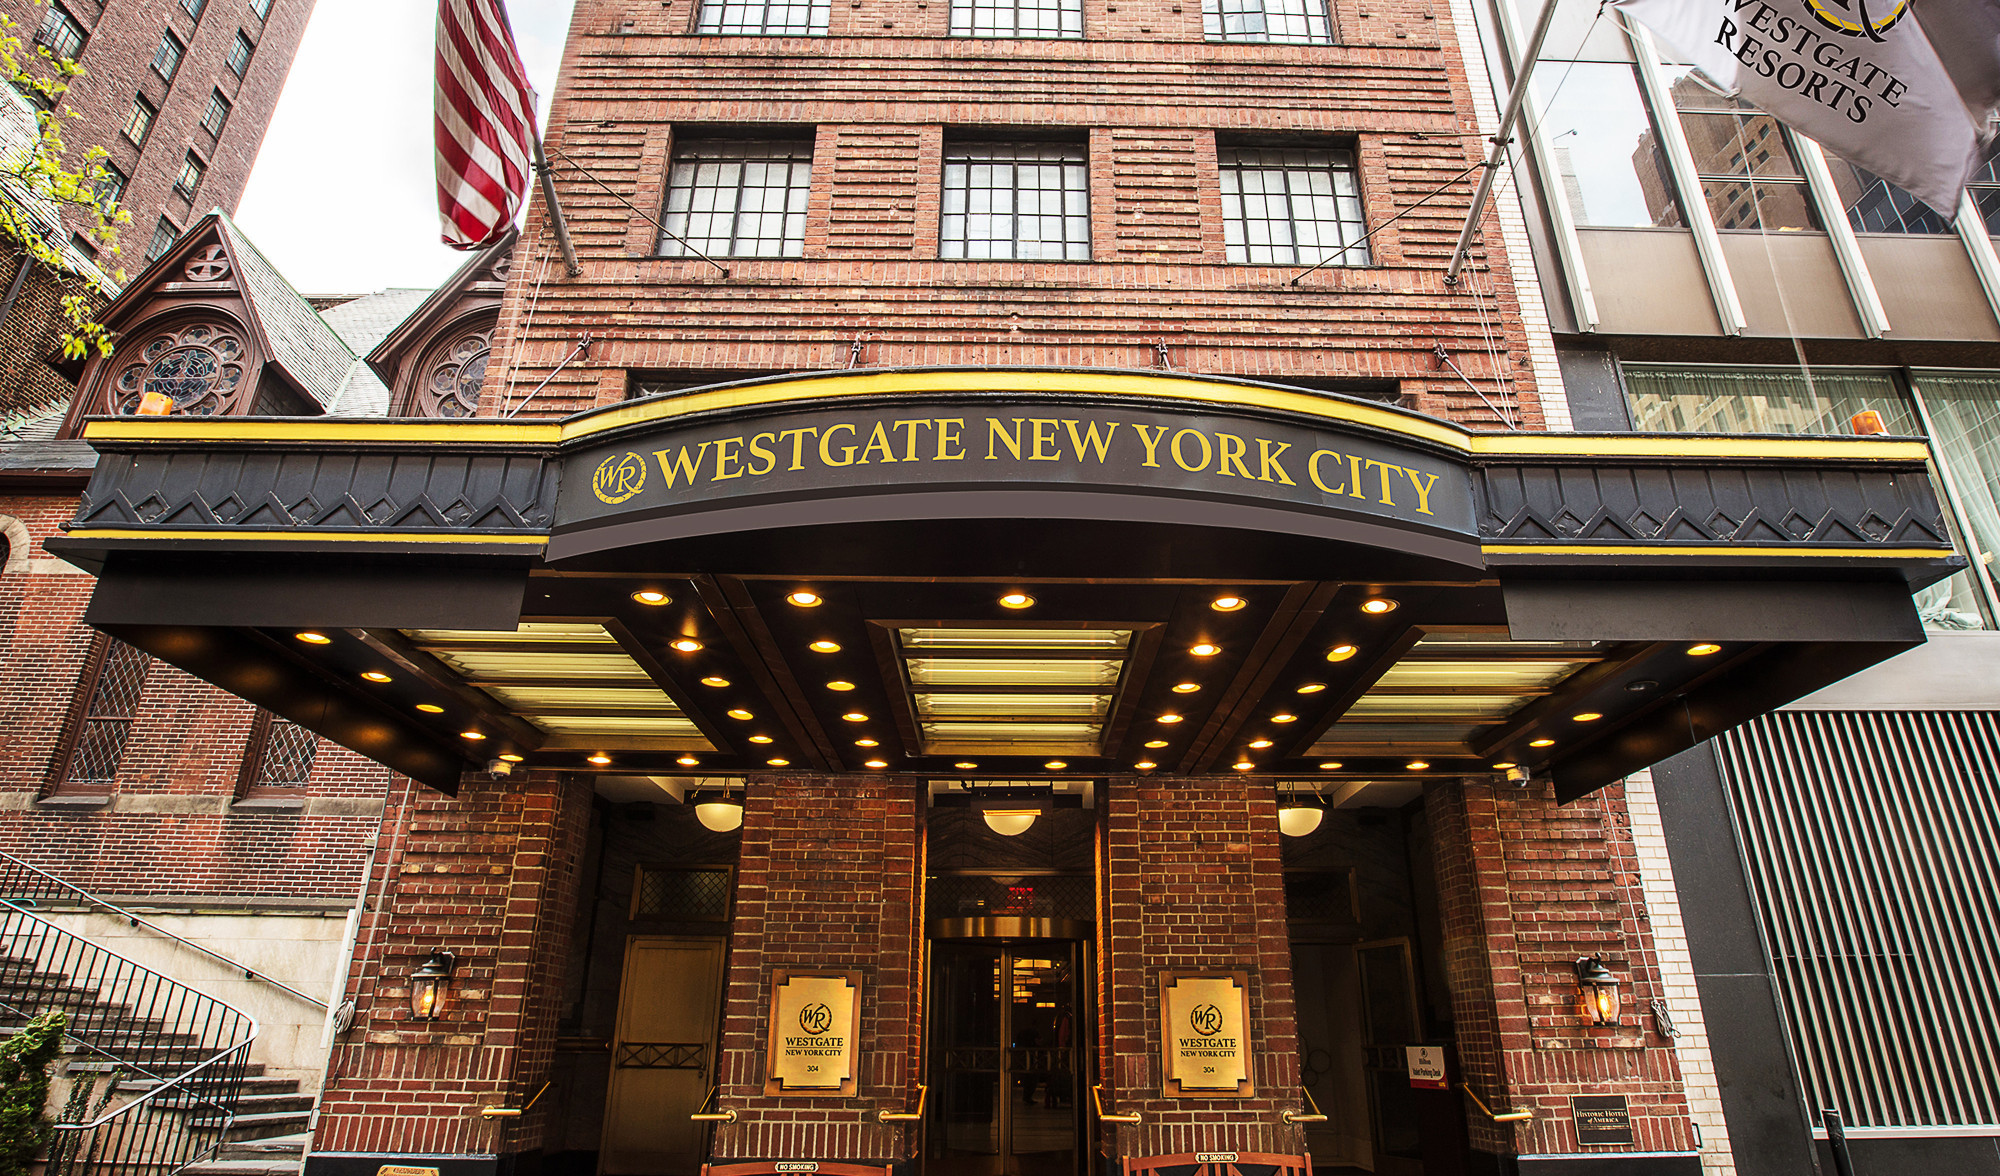 Following the acquisition the 23-floor 300-roomhotel has been rebranded Westgate New York City